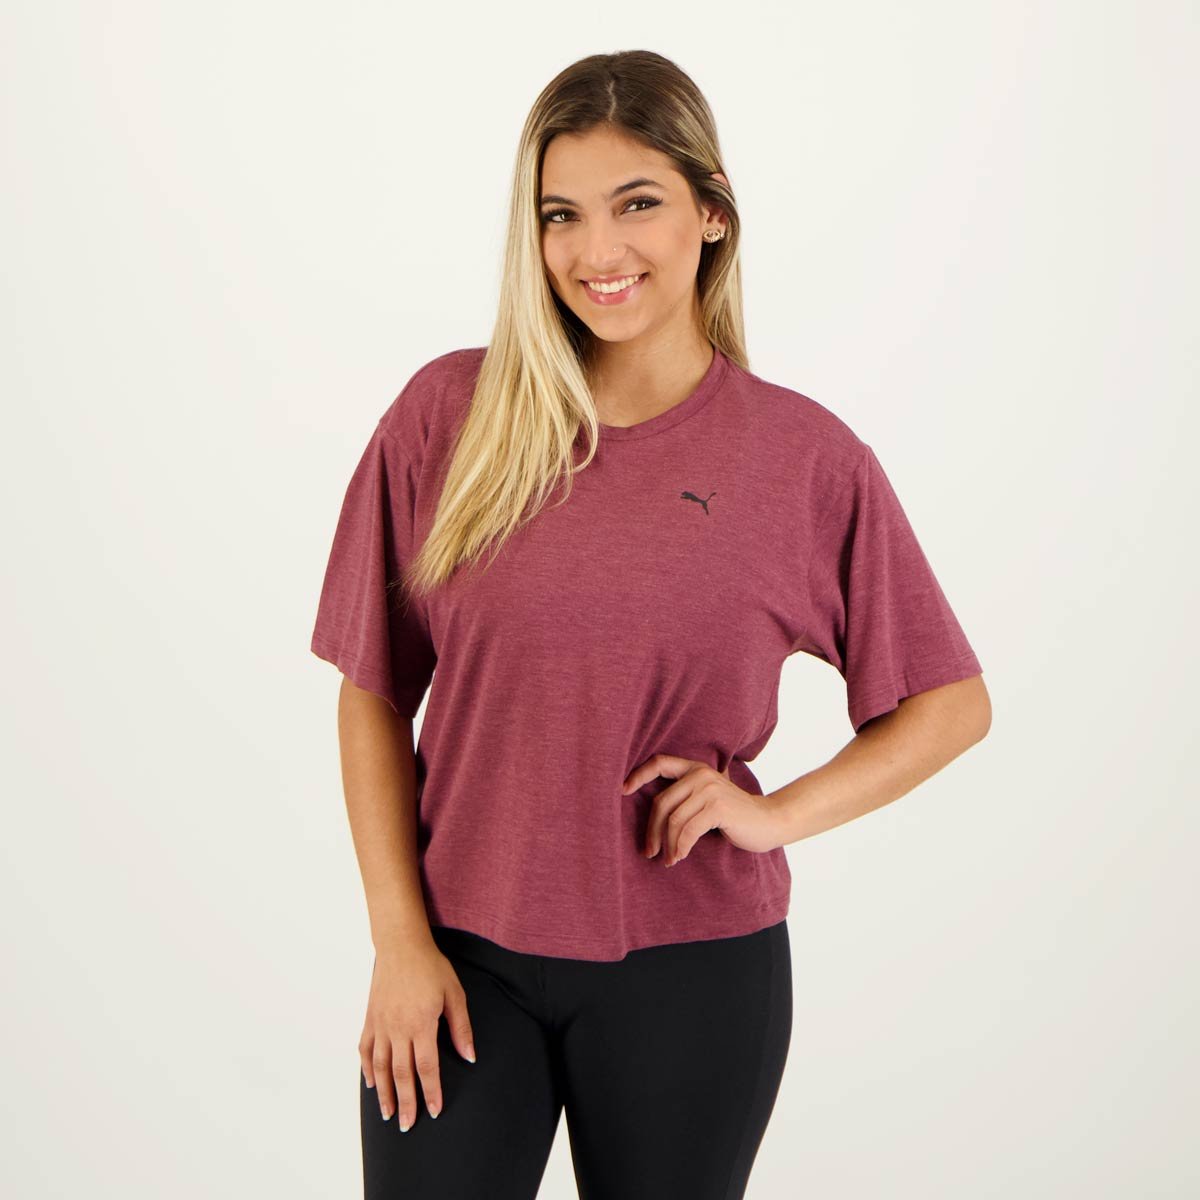  PUMA Women's Essentials Tee (Available in Plus Sizes